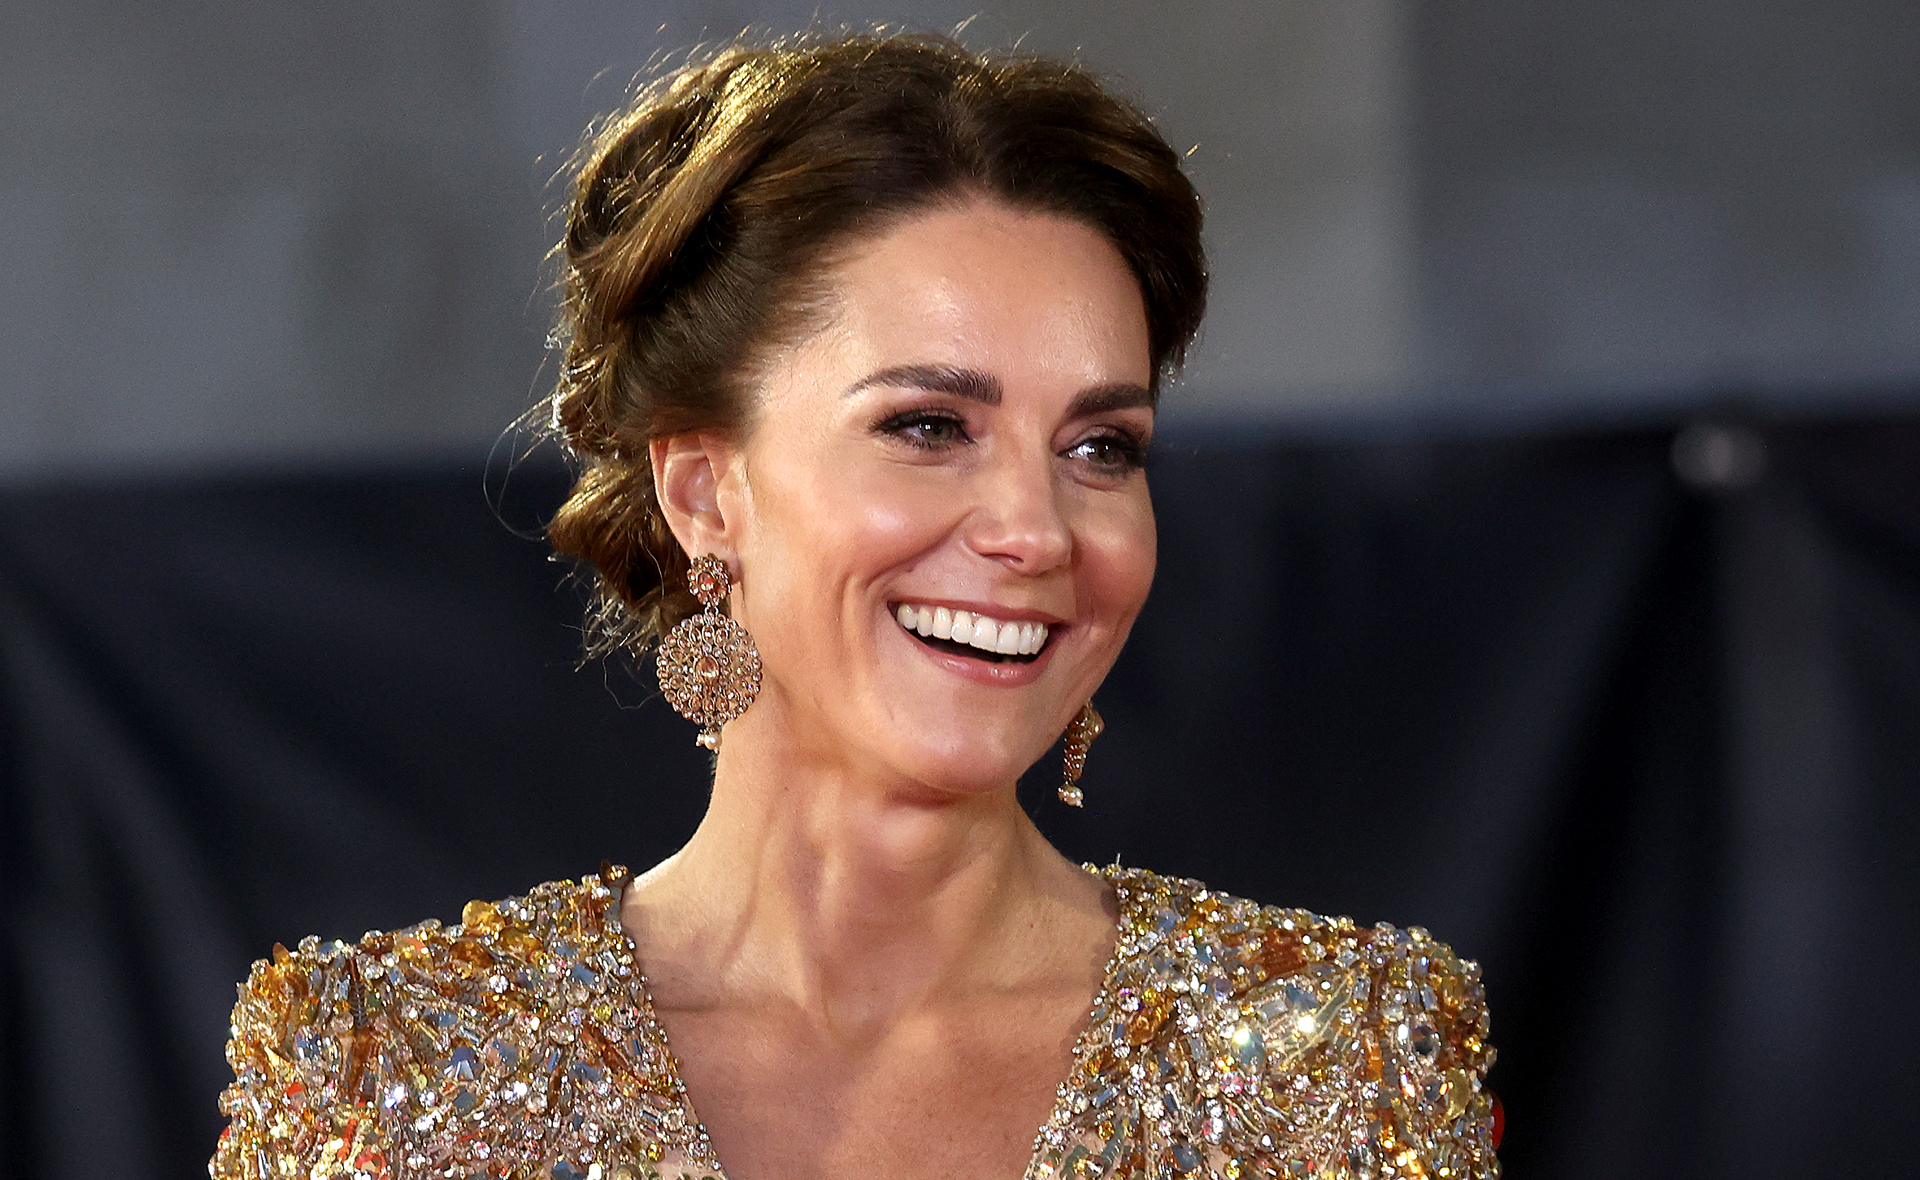 Duchess Catherine steals the show at the James Bond world premiere in the glittering gown of our dreams